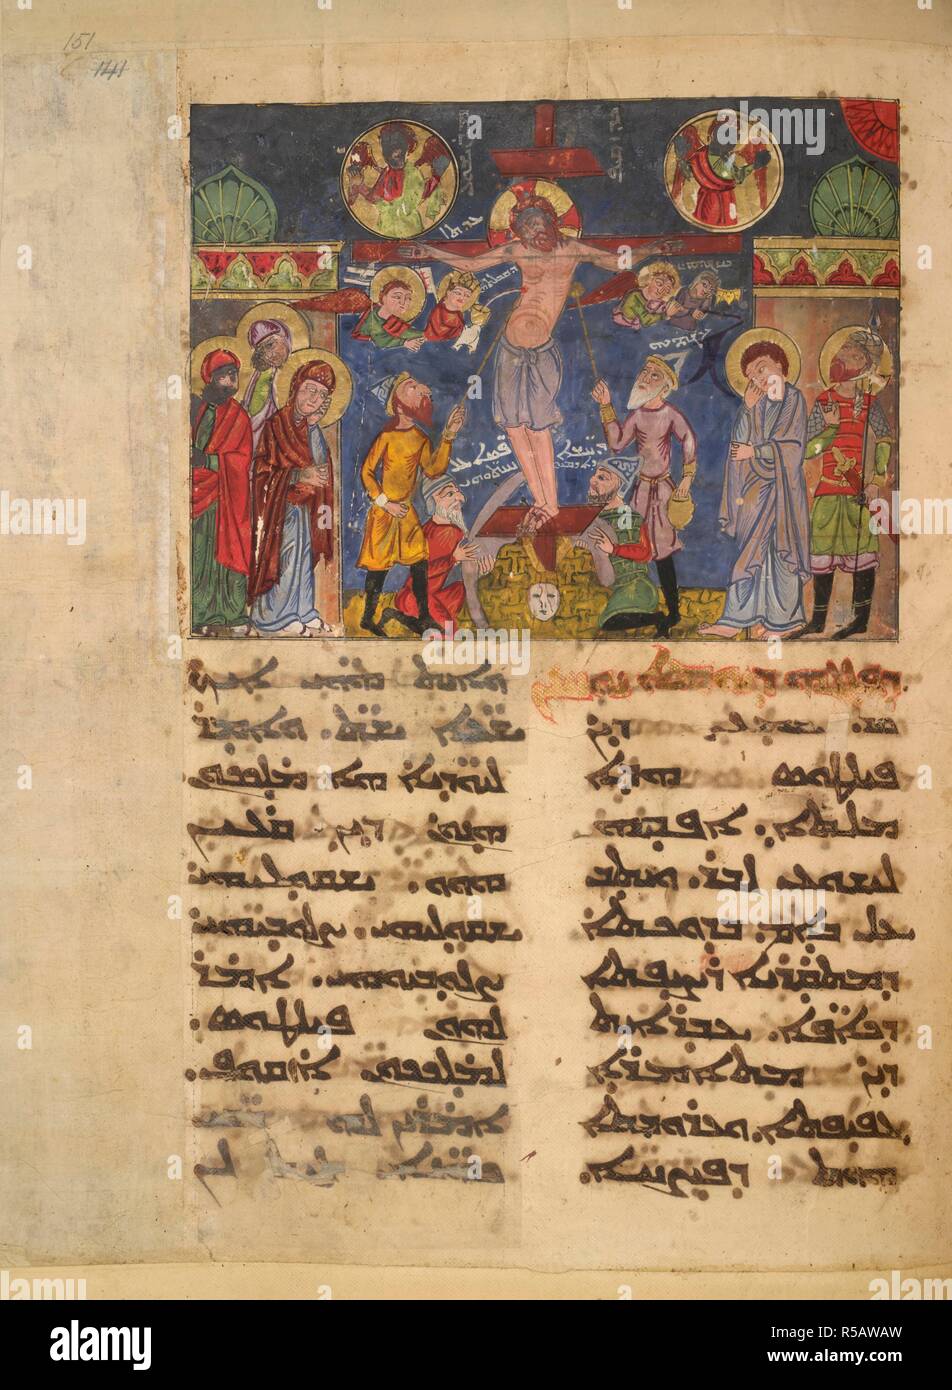 The Crucifixion. Syriac Lectionary. Mosul (Iraq), 1216-1220. The Crucifixion, witnessed by the Holy Women and the Roman soldiers. This manuscript contains passages from the Gospels in liturgical sequence that are used as readings in church services. Tempera on paper.  Image taken from Syriac Lectionary.  Originally published/produced in Mosul (Iraq), 1216-1220. . Source: Add. 7170, f.151. Language: Syriac. Stock Photo